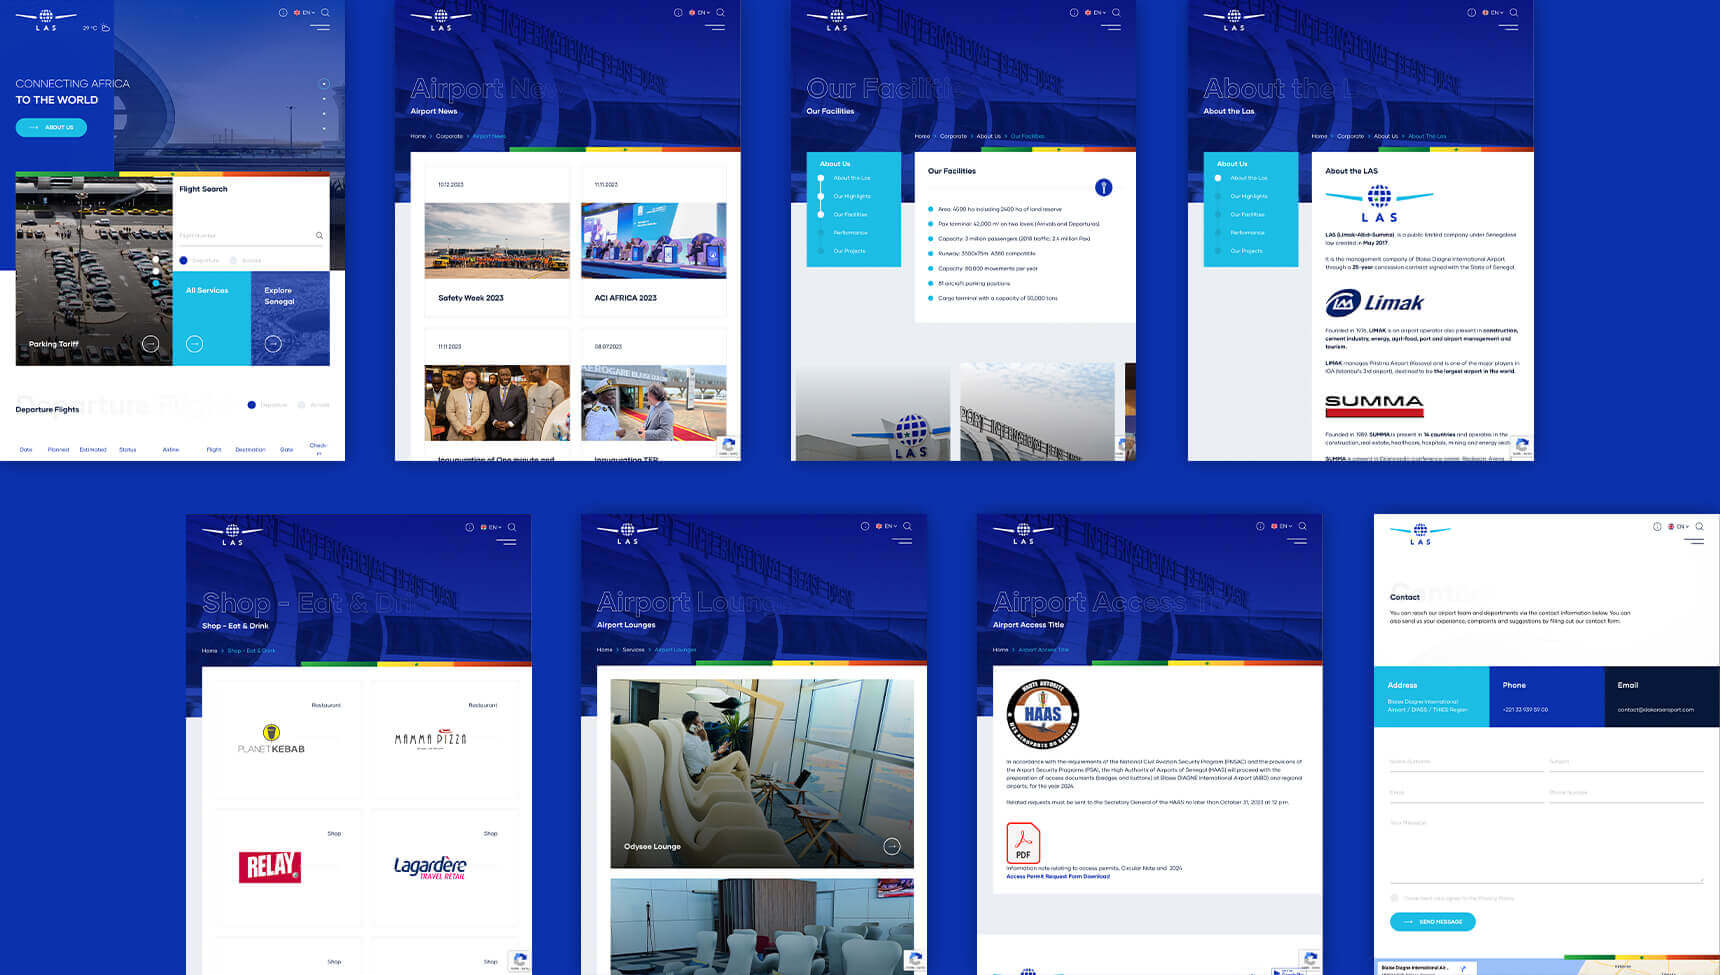 Dakar Aeroport-2 - wrinting 1-3 - web promo-5 - website-page-6 - app-mockup-7- home-page-8 - type-9 - color-10 - web-pages-11 - laptop-mockup-12 - mobil-page-13 - tablet-screen